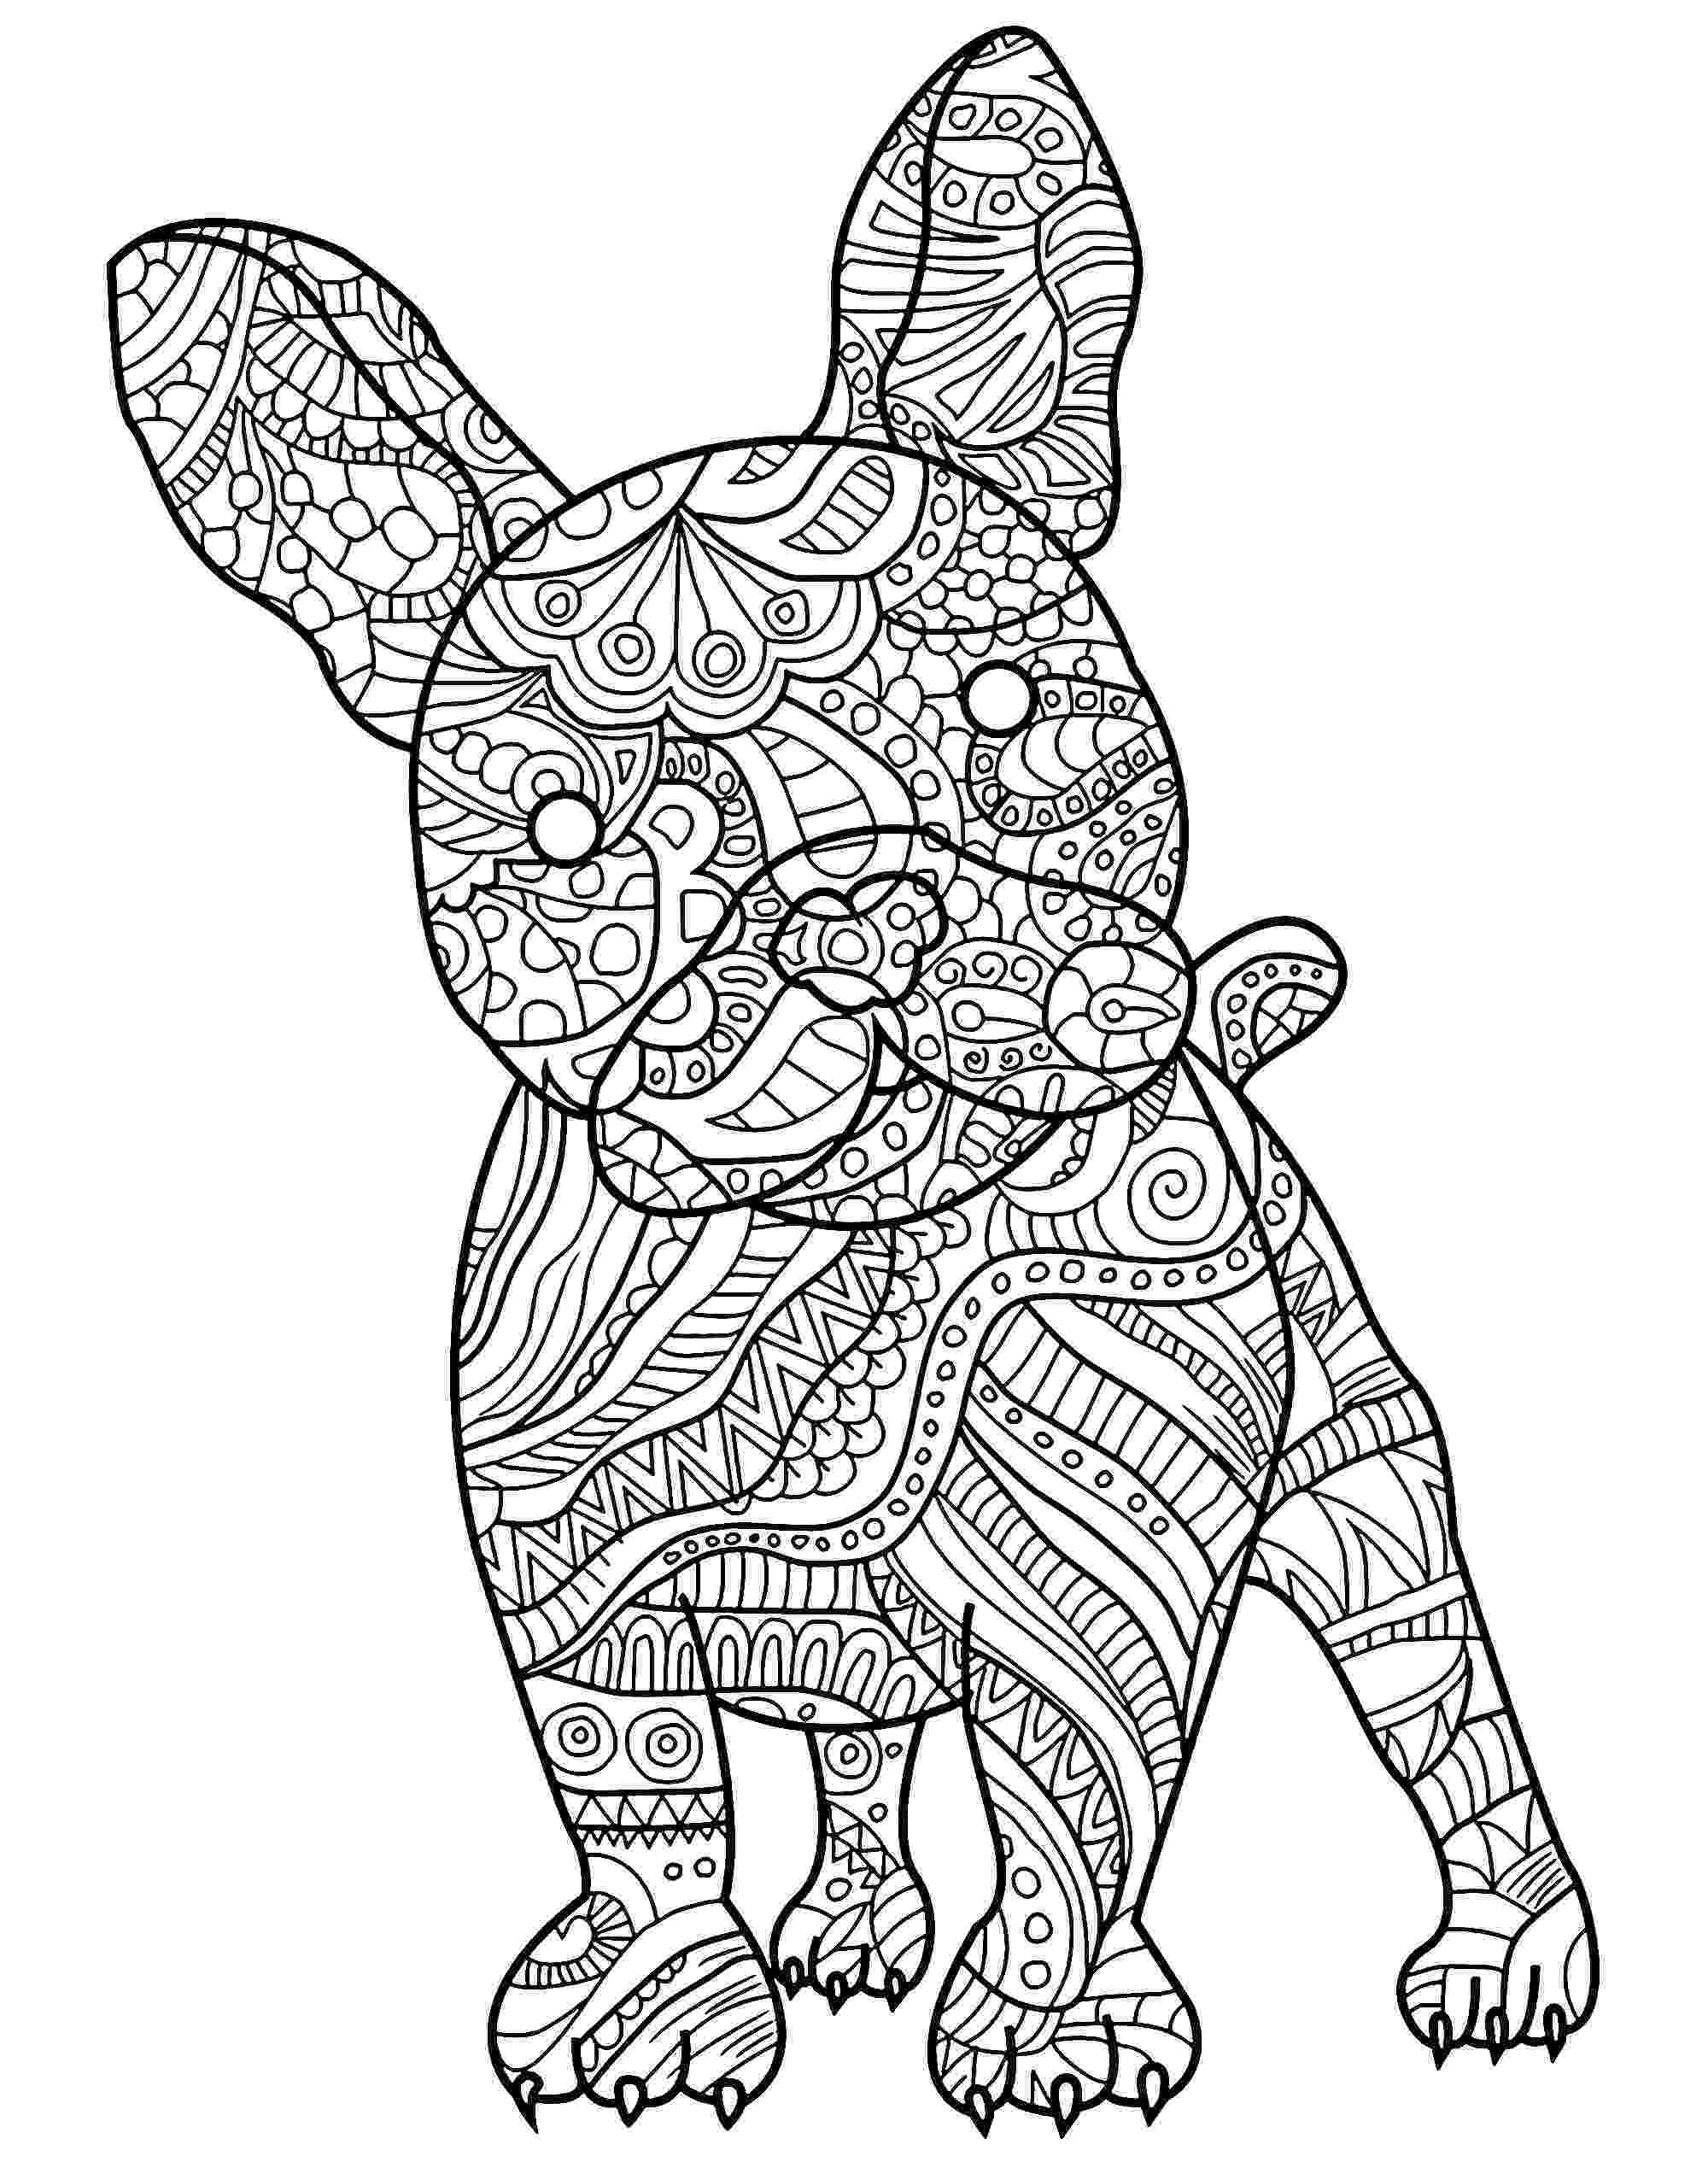 free online dog coloring pages siberian husky coloring page free siberian husky online pages free dog coloring online 